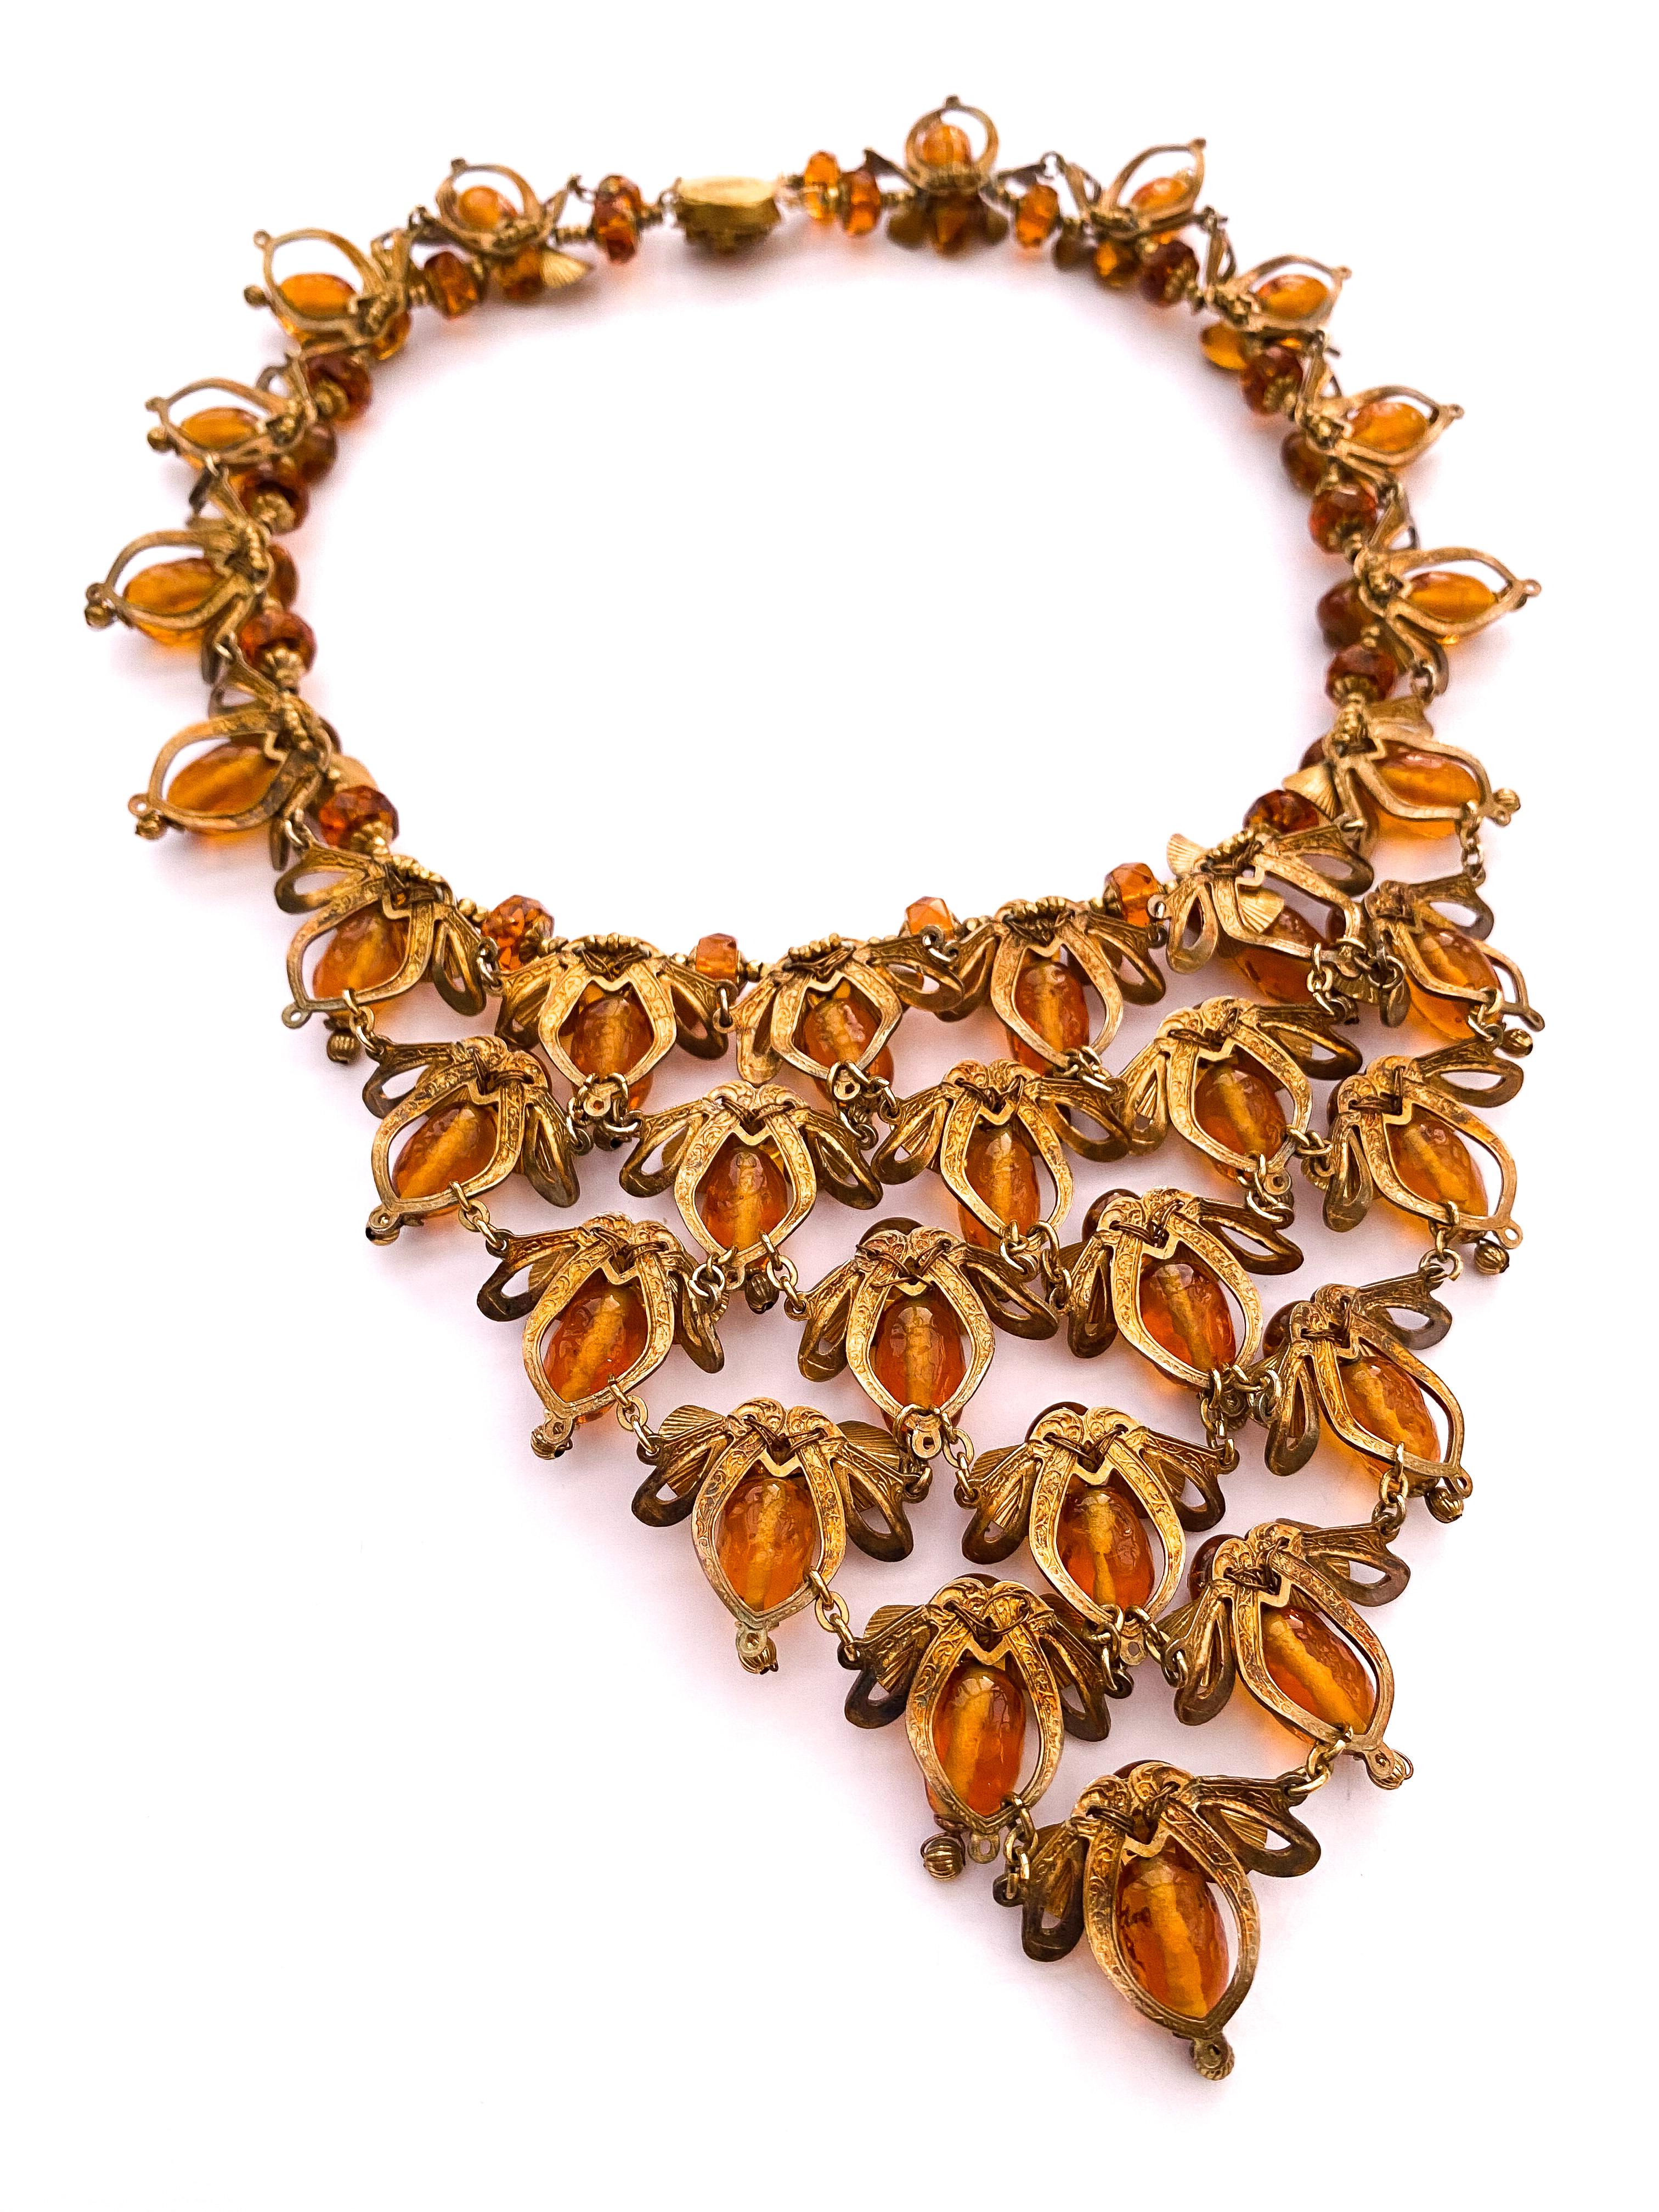 A magnificent topaz glass bead necklace, with 'bee' motif, Miriam Haskell, c1965 For Sale 9